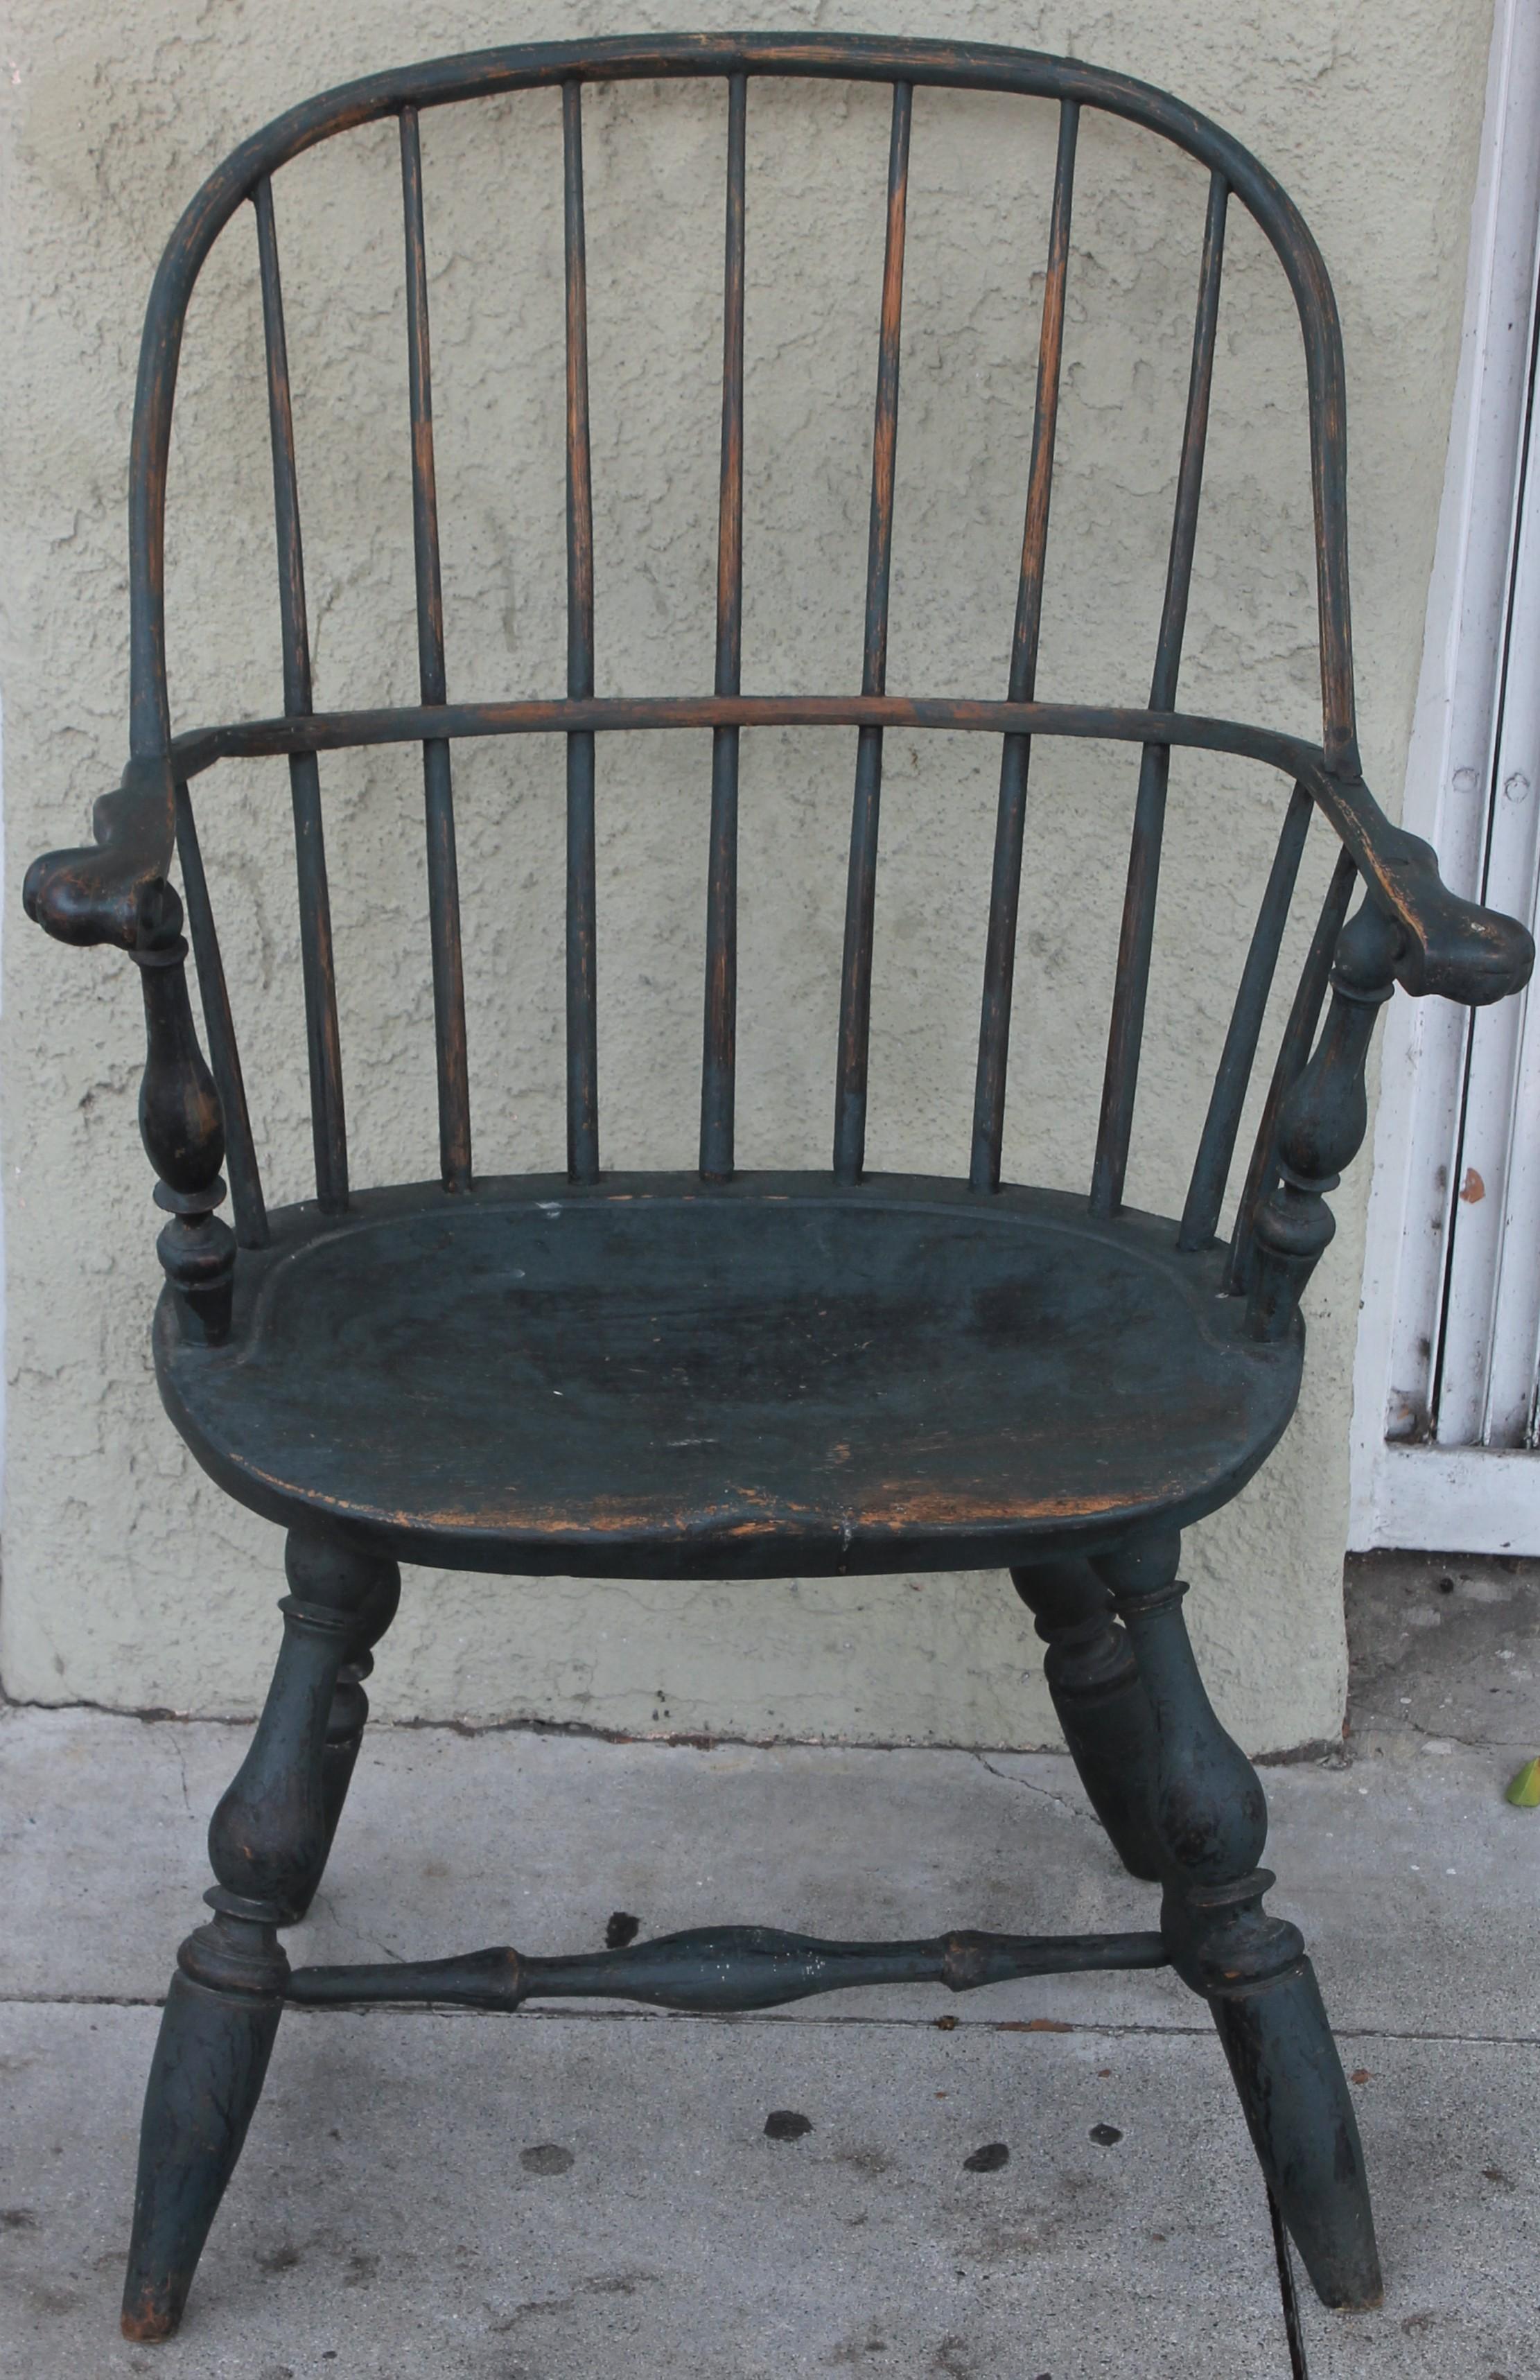 This fantastic 18thc Lancaster lounty, Pennsylvania Windsor is in original blue painted surface. This extended knuckle arm chair has wonderful worn patina. The saddle seat has wear and amazing surface.